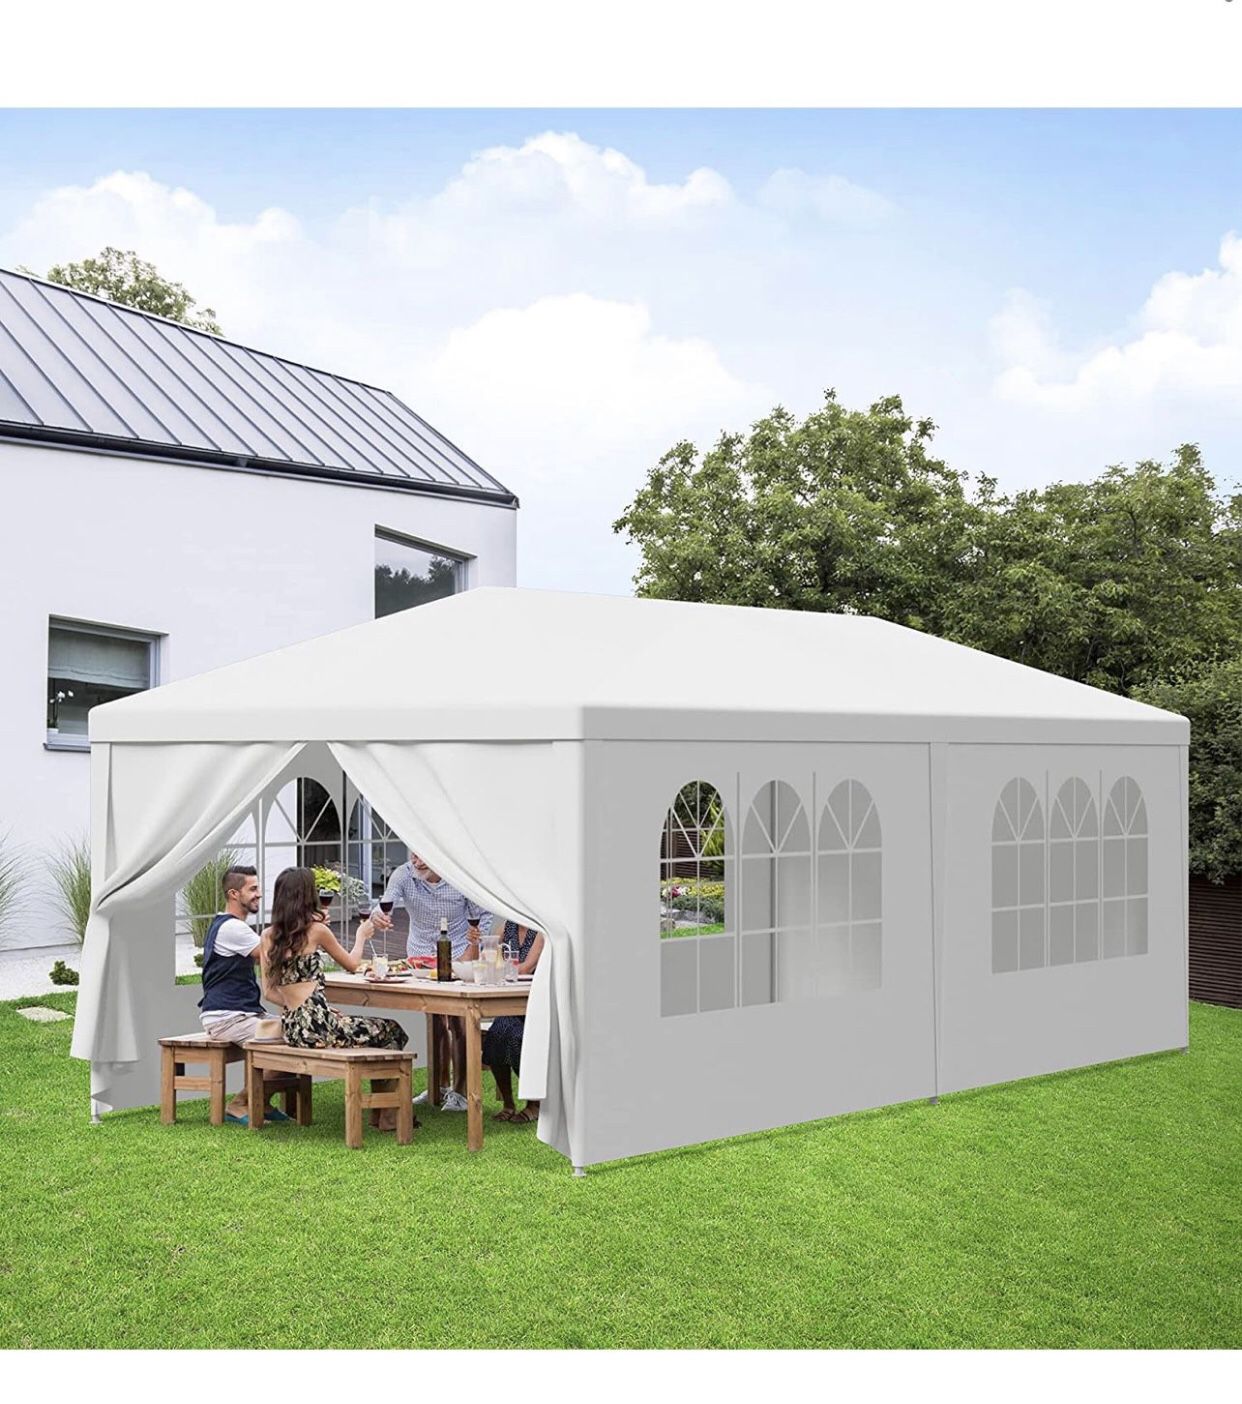 10x20 wedding party tent outdoor canopy teng with 6 side walls white FOR SALE 